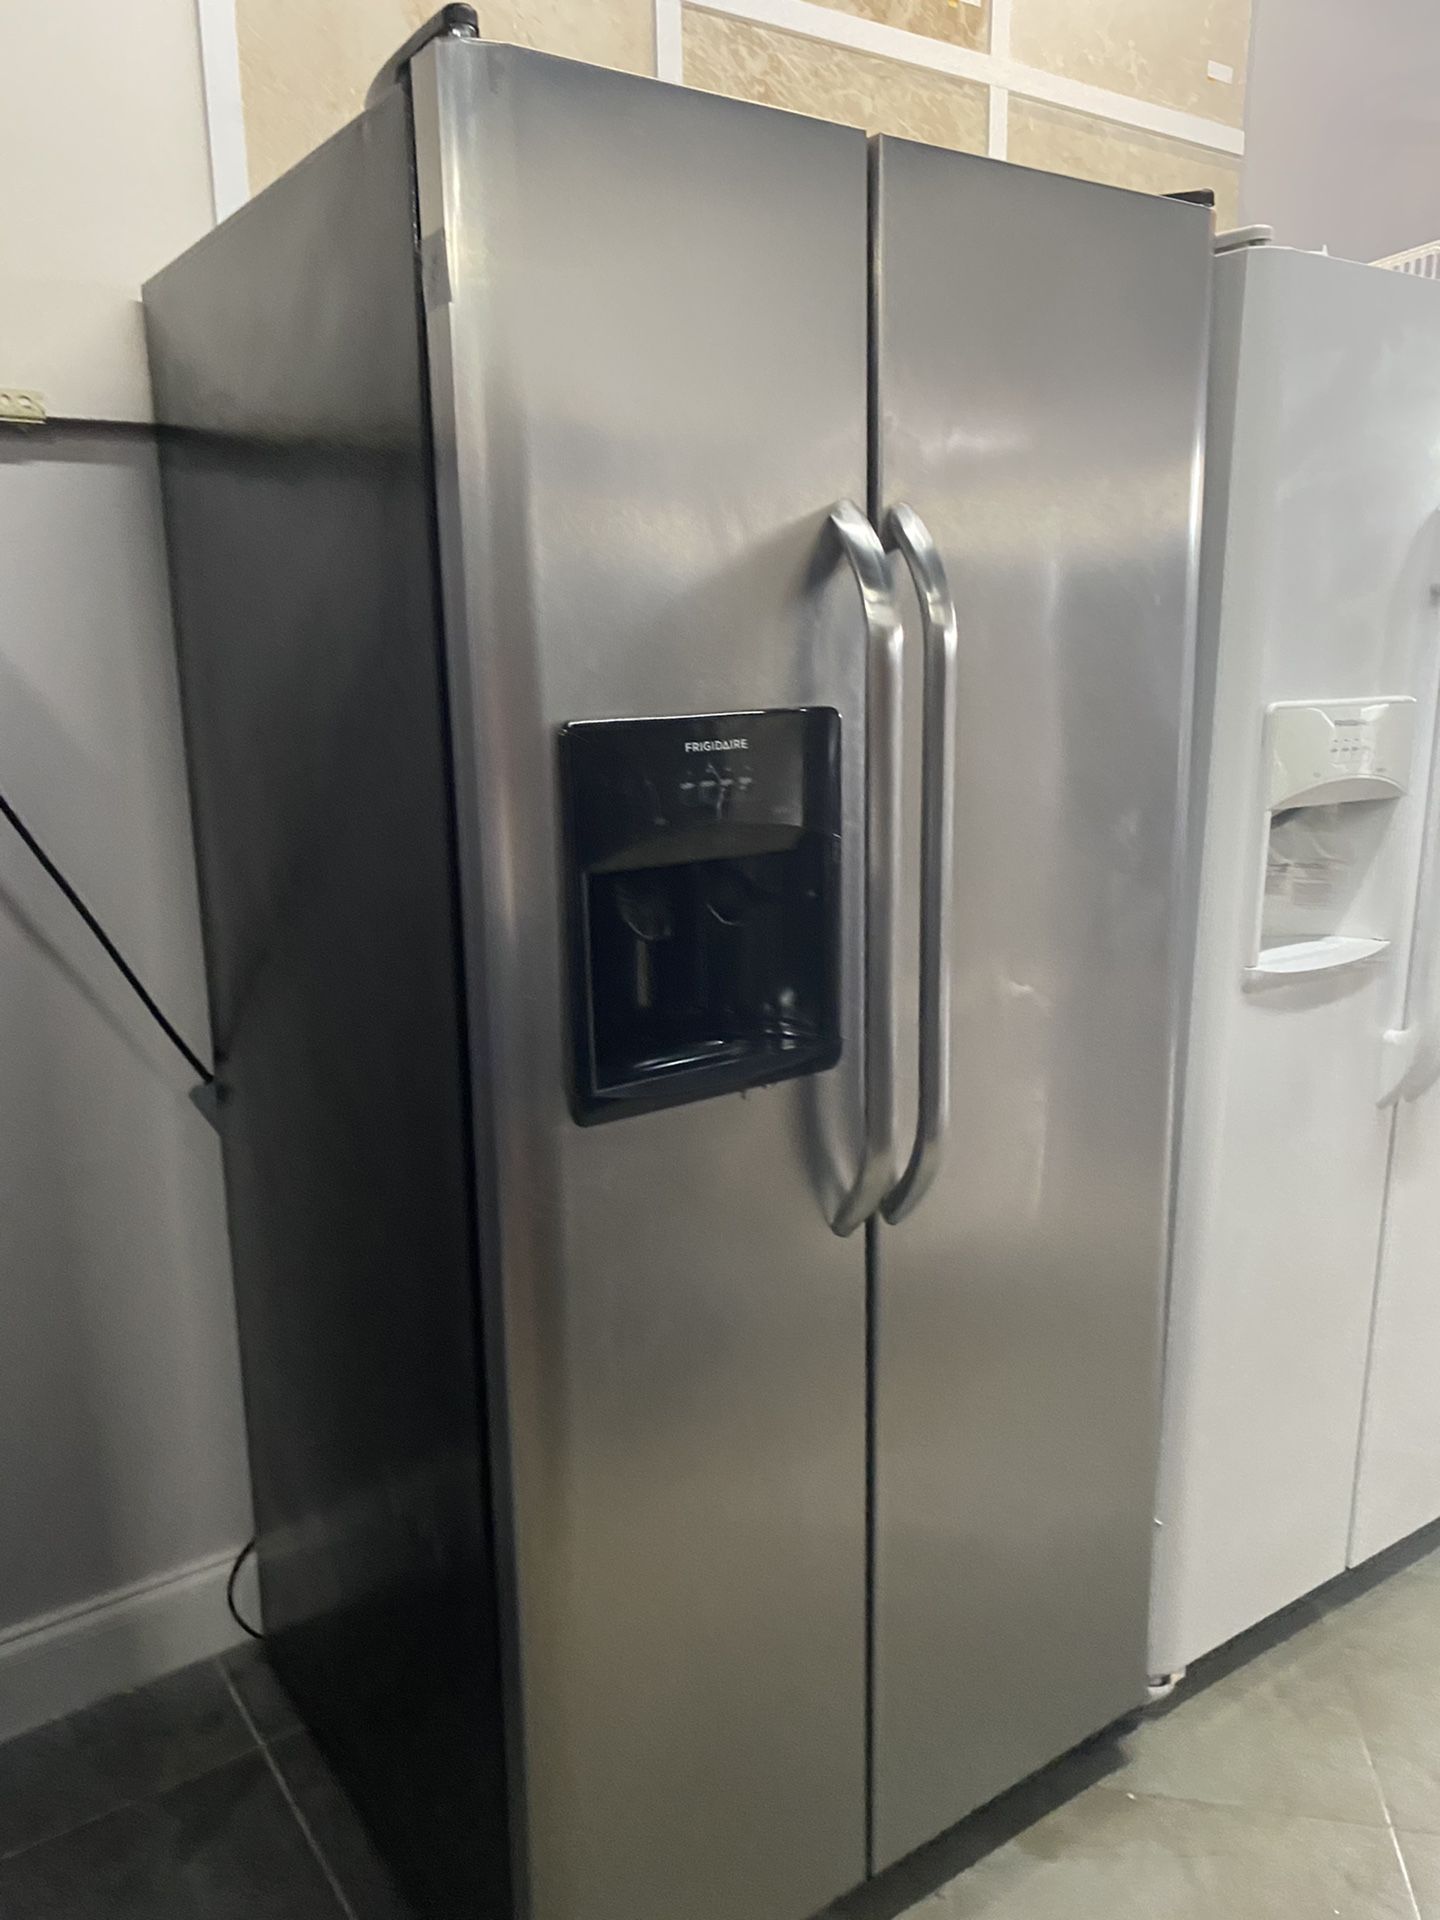 Frigidaire stainless steel refrigerator 33” wide in perfect condition and 3 months warranty. We have delivery service available